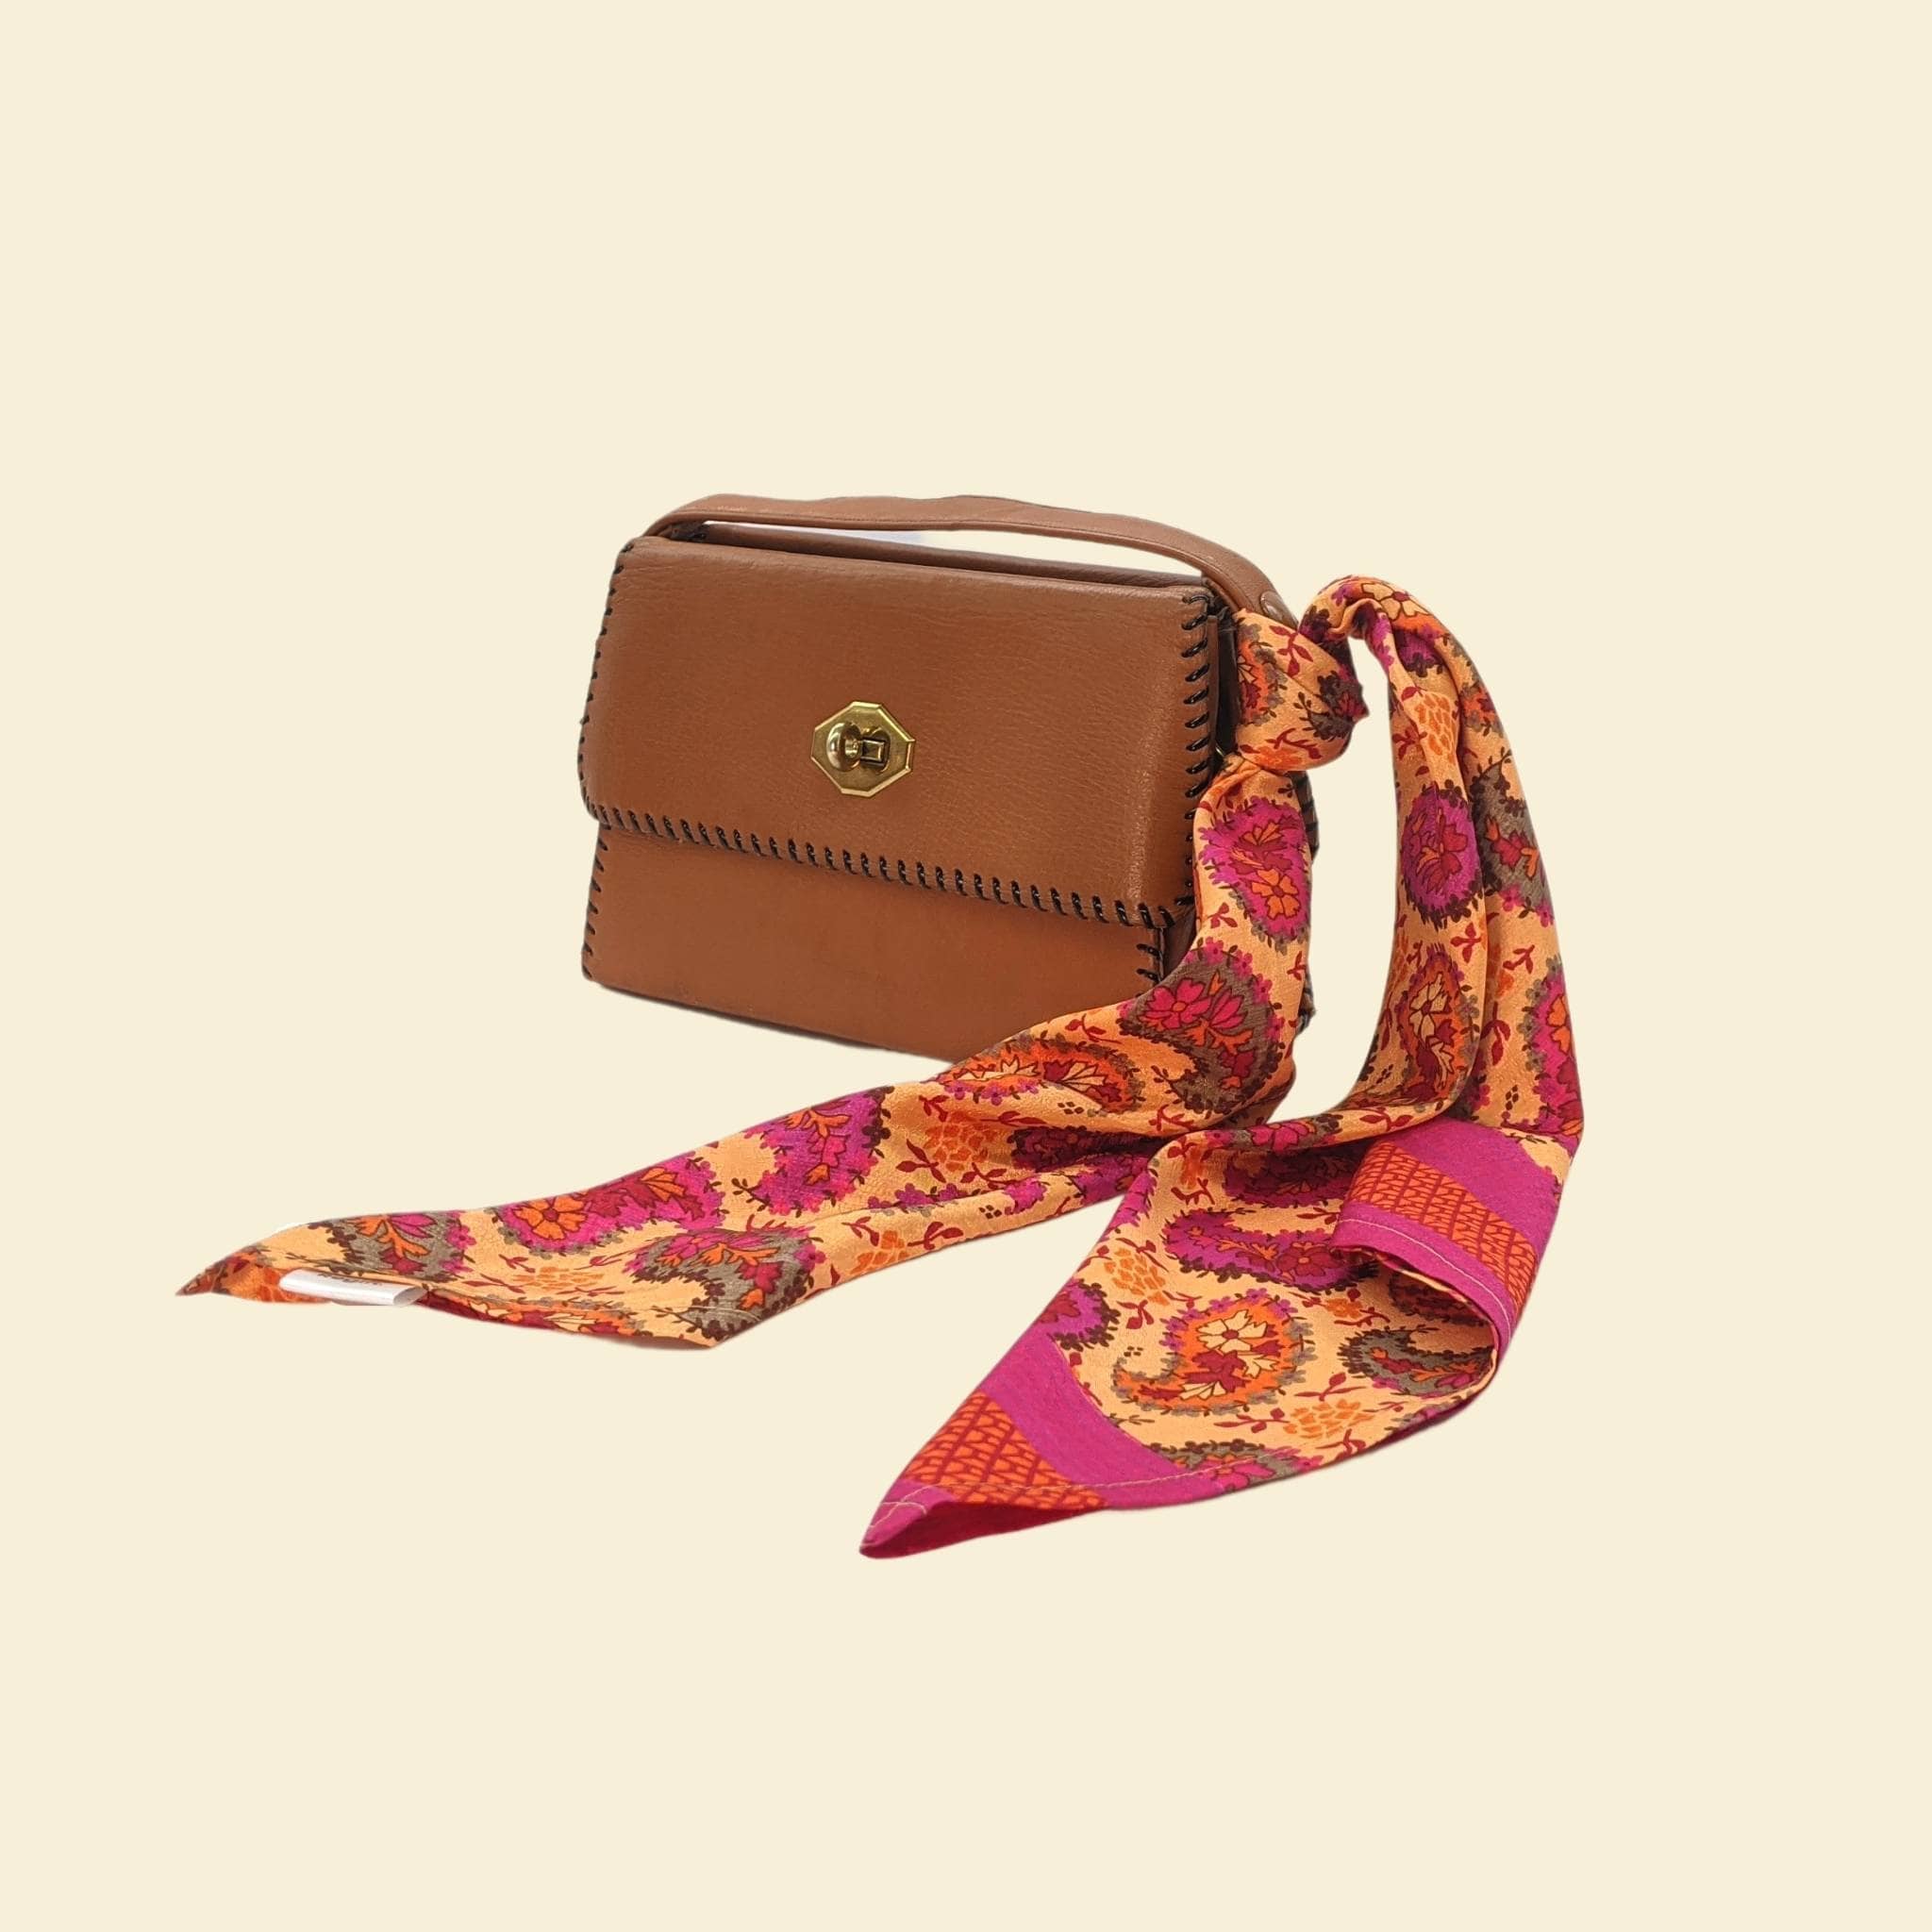 15 WAYS TO TIE A TWILLY ON A HANDBAG  Louis Vuitton Bandeau Scarf 